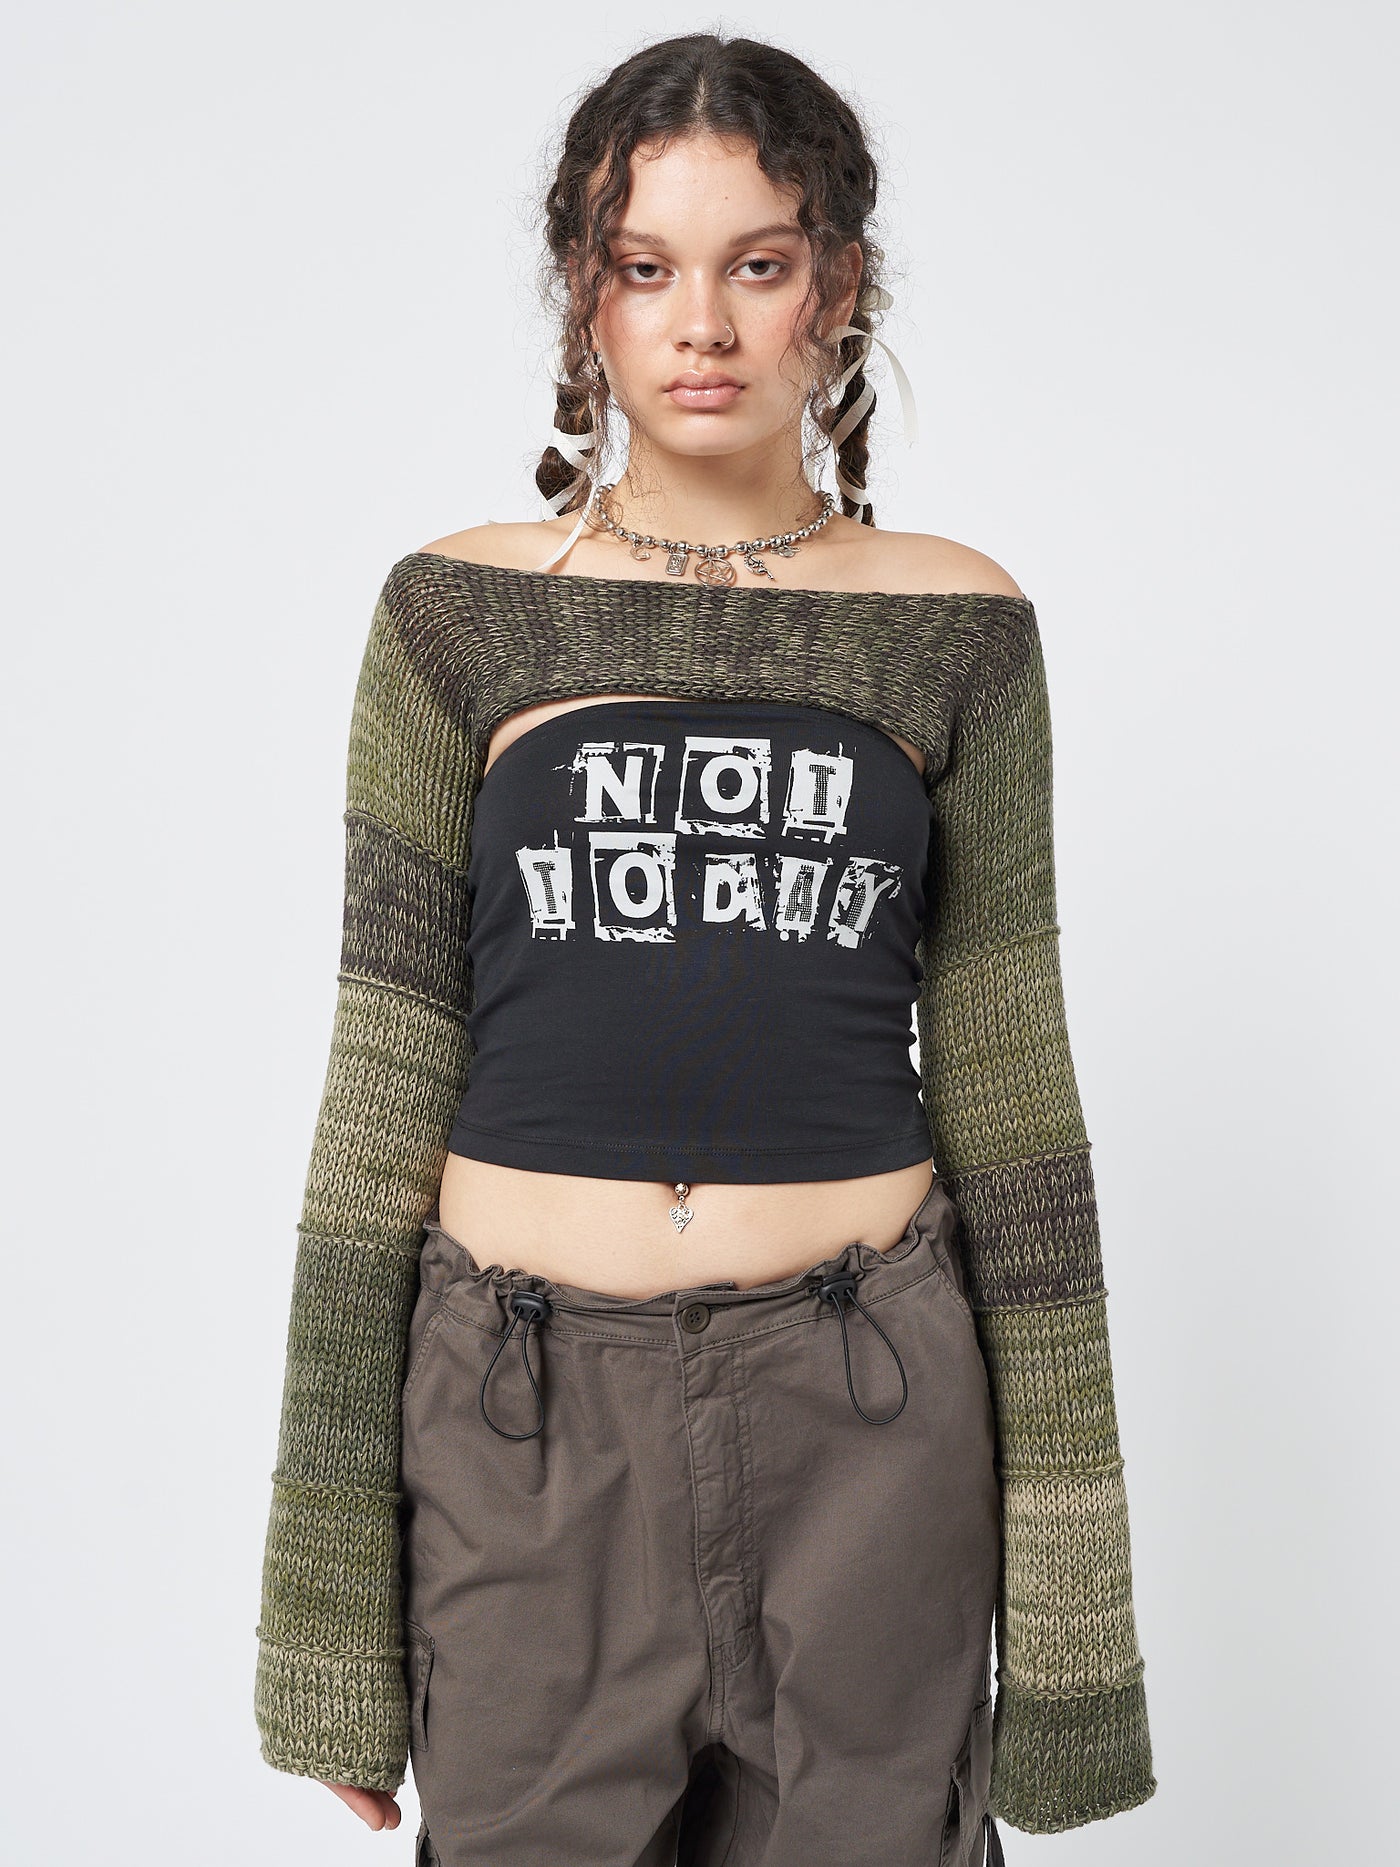  A unique and vibrant knitted shrug with a patchwork design in various shades of green.